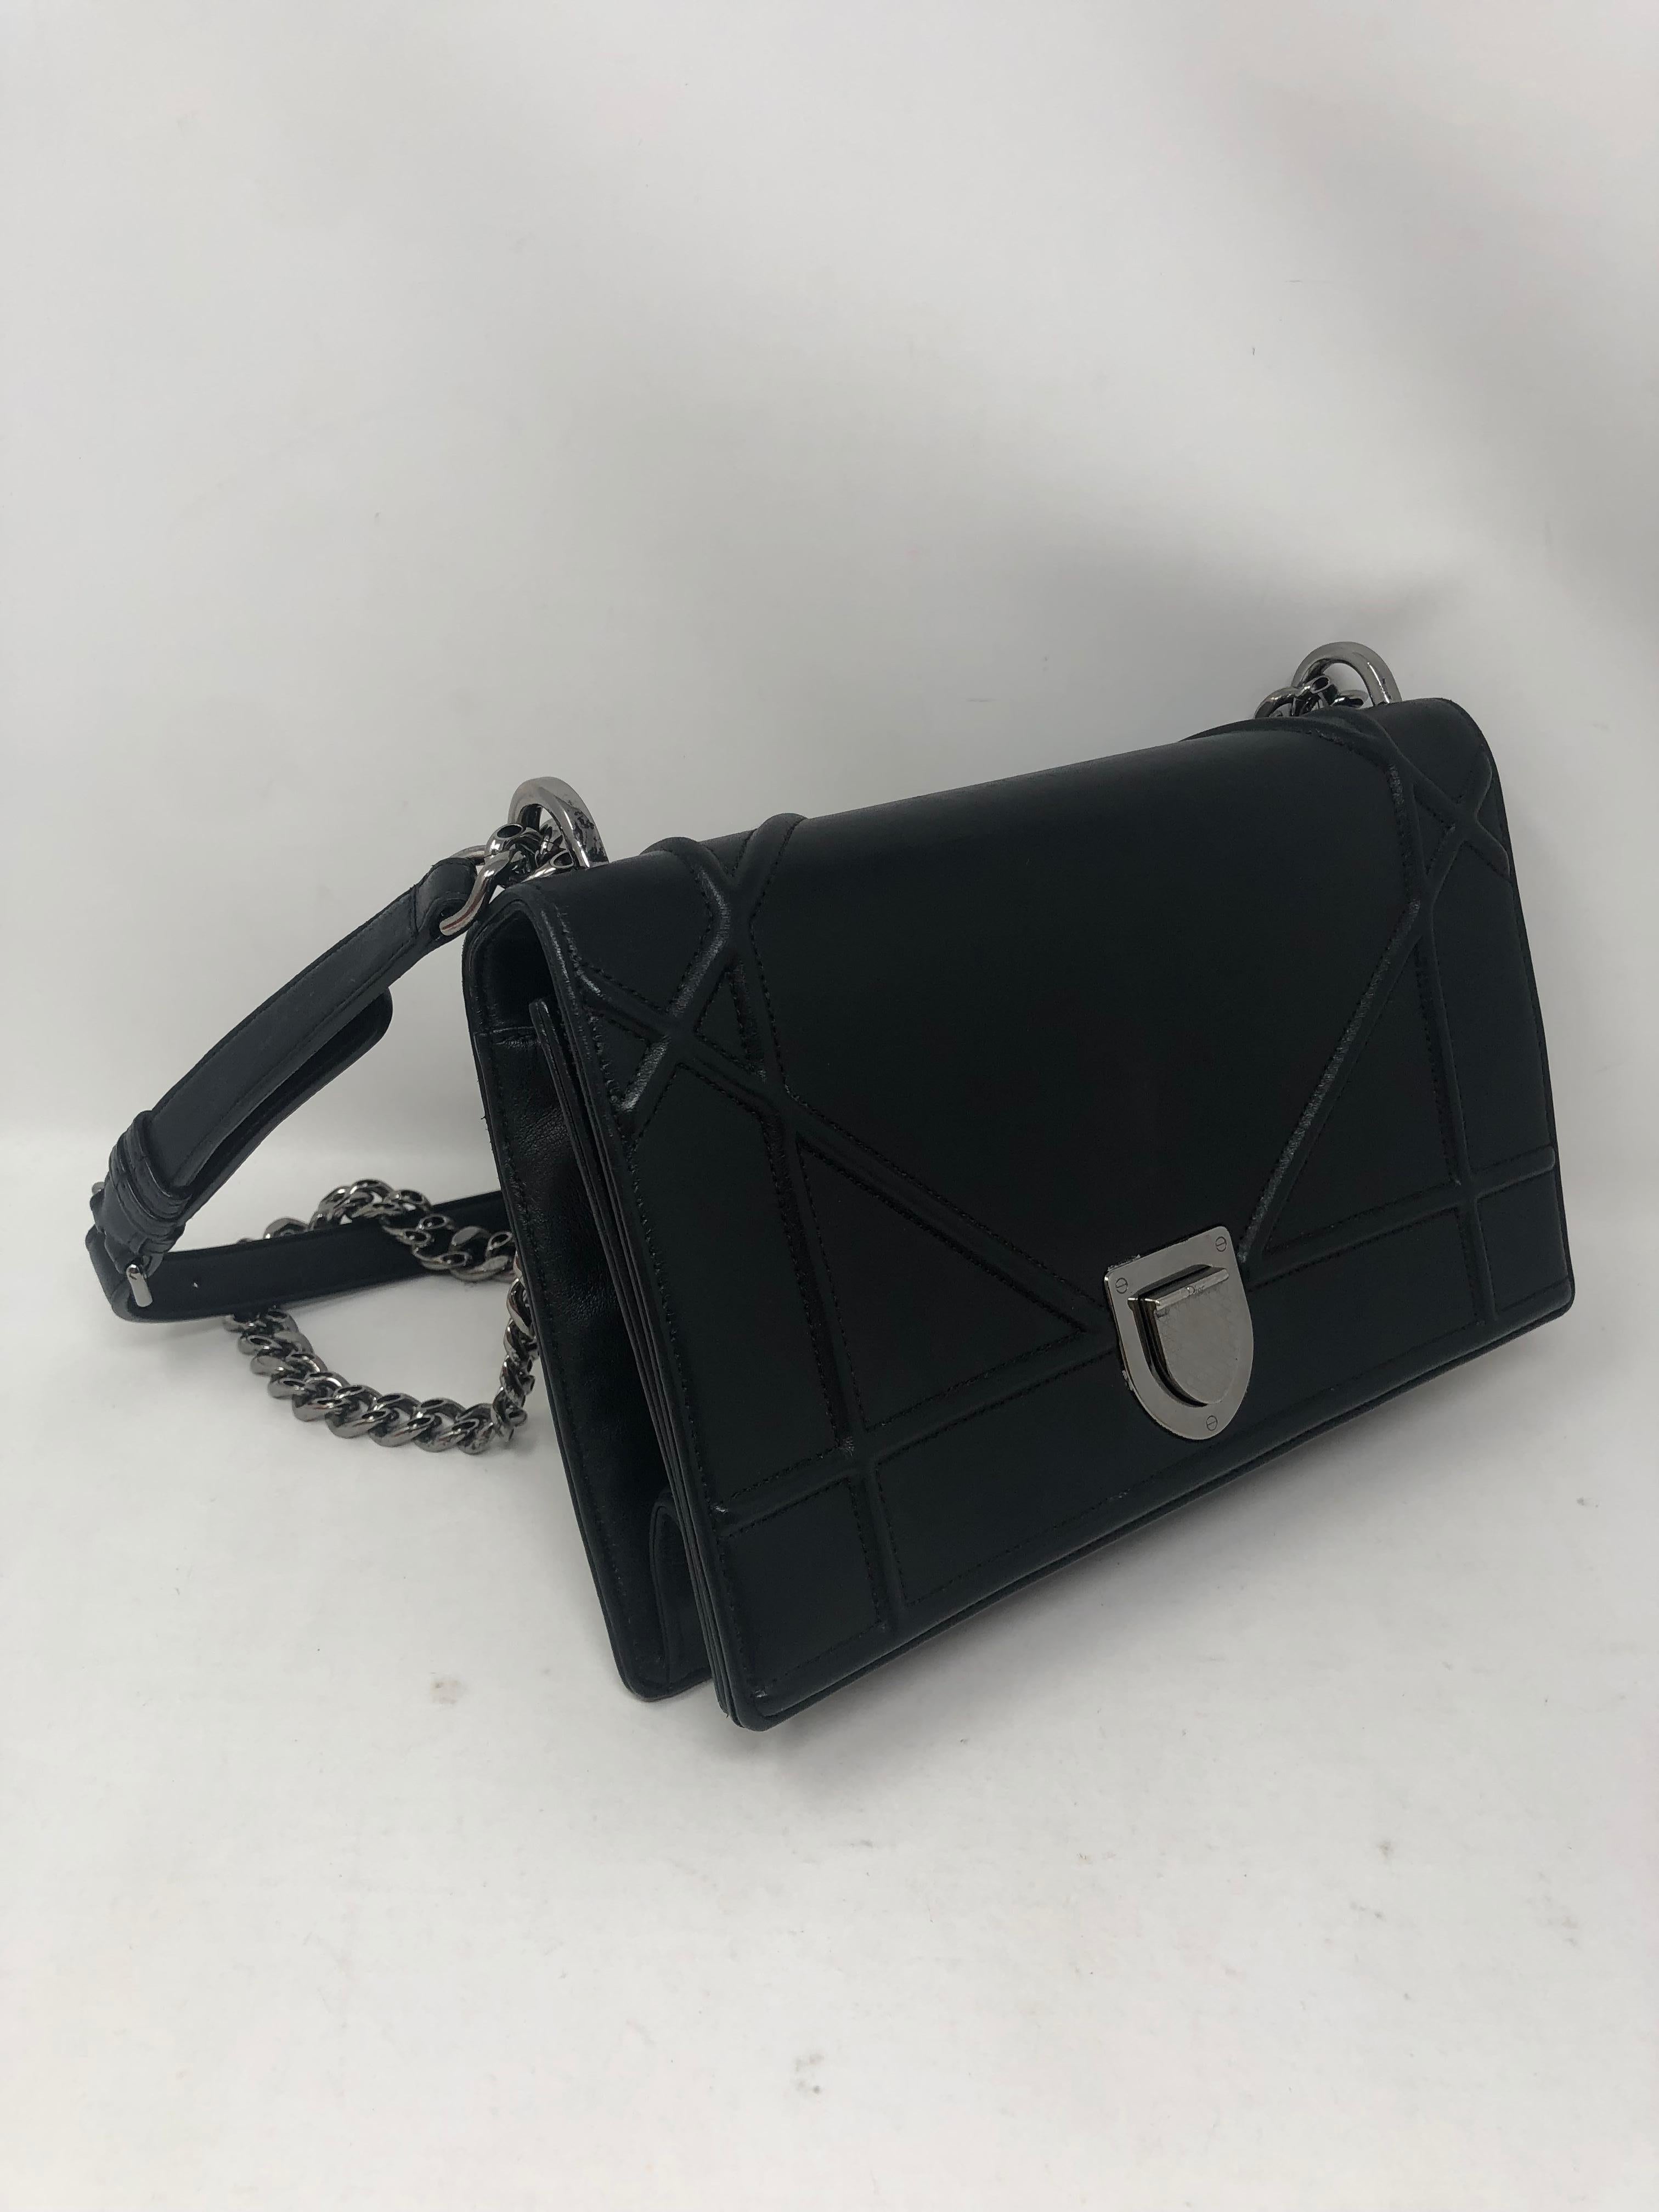 Christian Dior Black Diorama Bag. Beautiful black leather bag than can be worn on the shoulder or crossbody. 